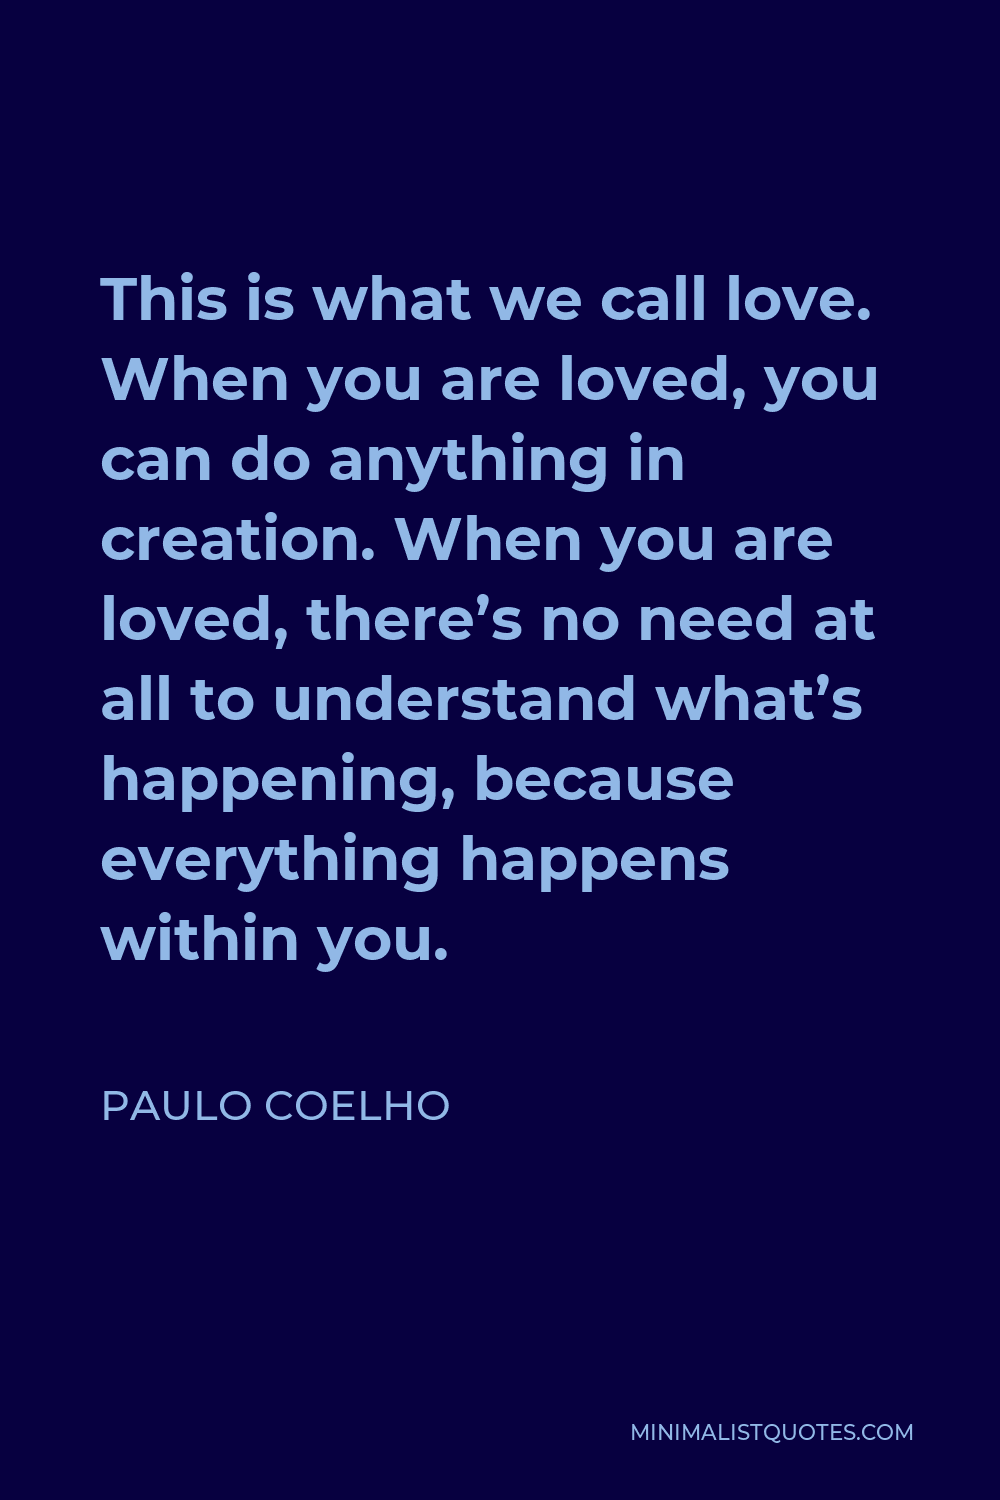 Paulo Coelho Quote - This is what we call love. When you are loved, you can do anything in creation. When you are loved, there’s no need at all to understand what’s happening, because everything happens within you.